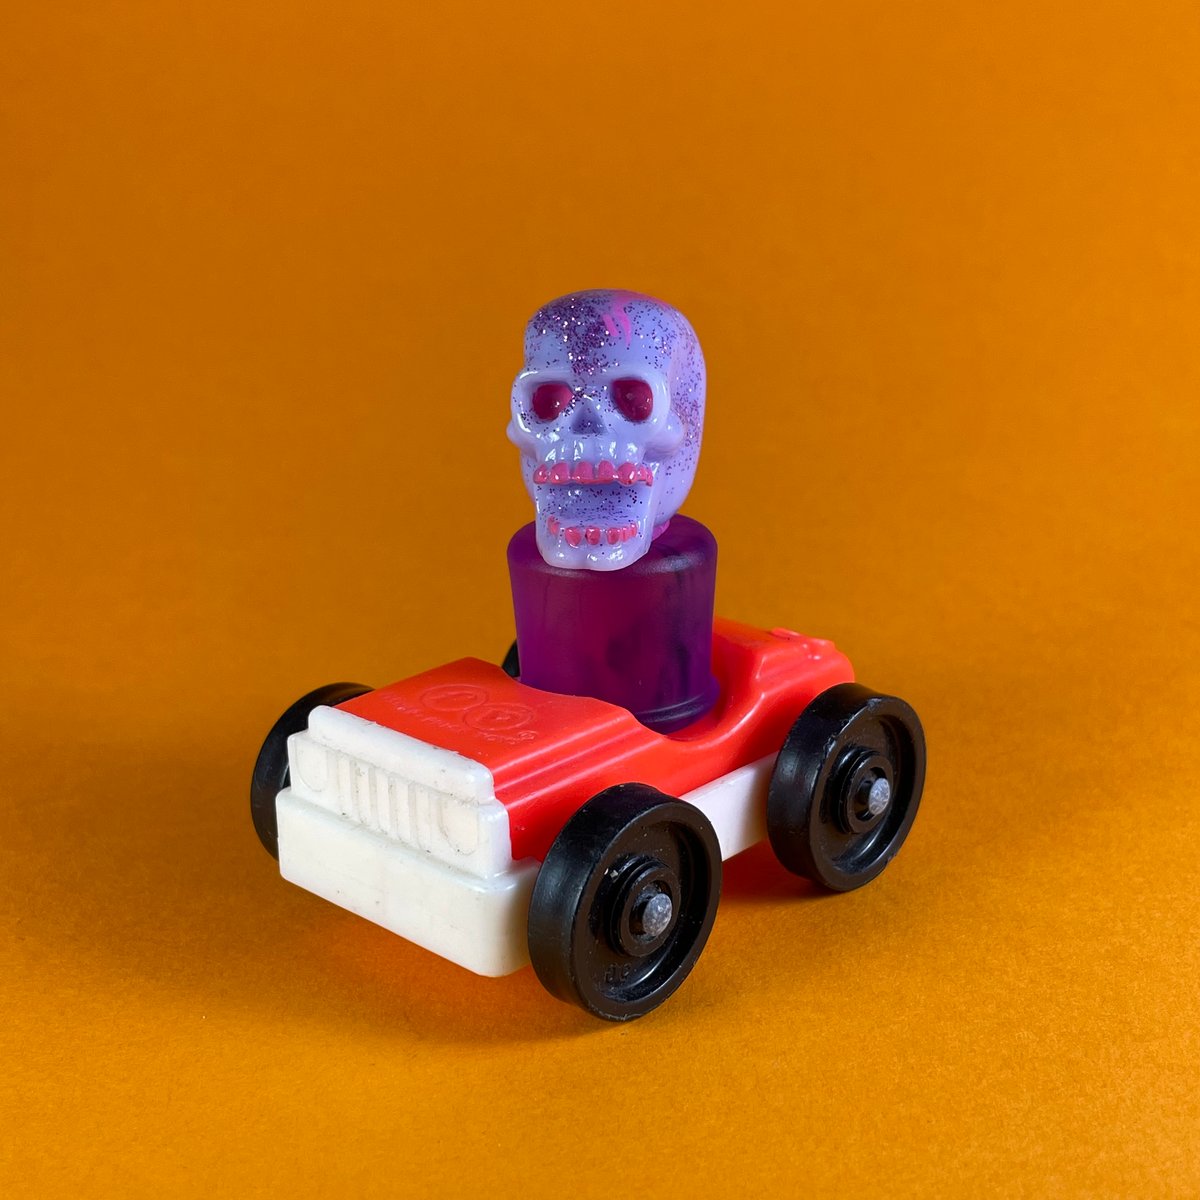 Image of Skull peg toy and Fisher-Price car